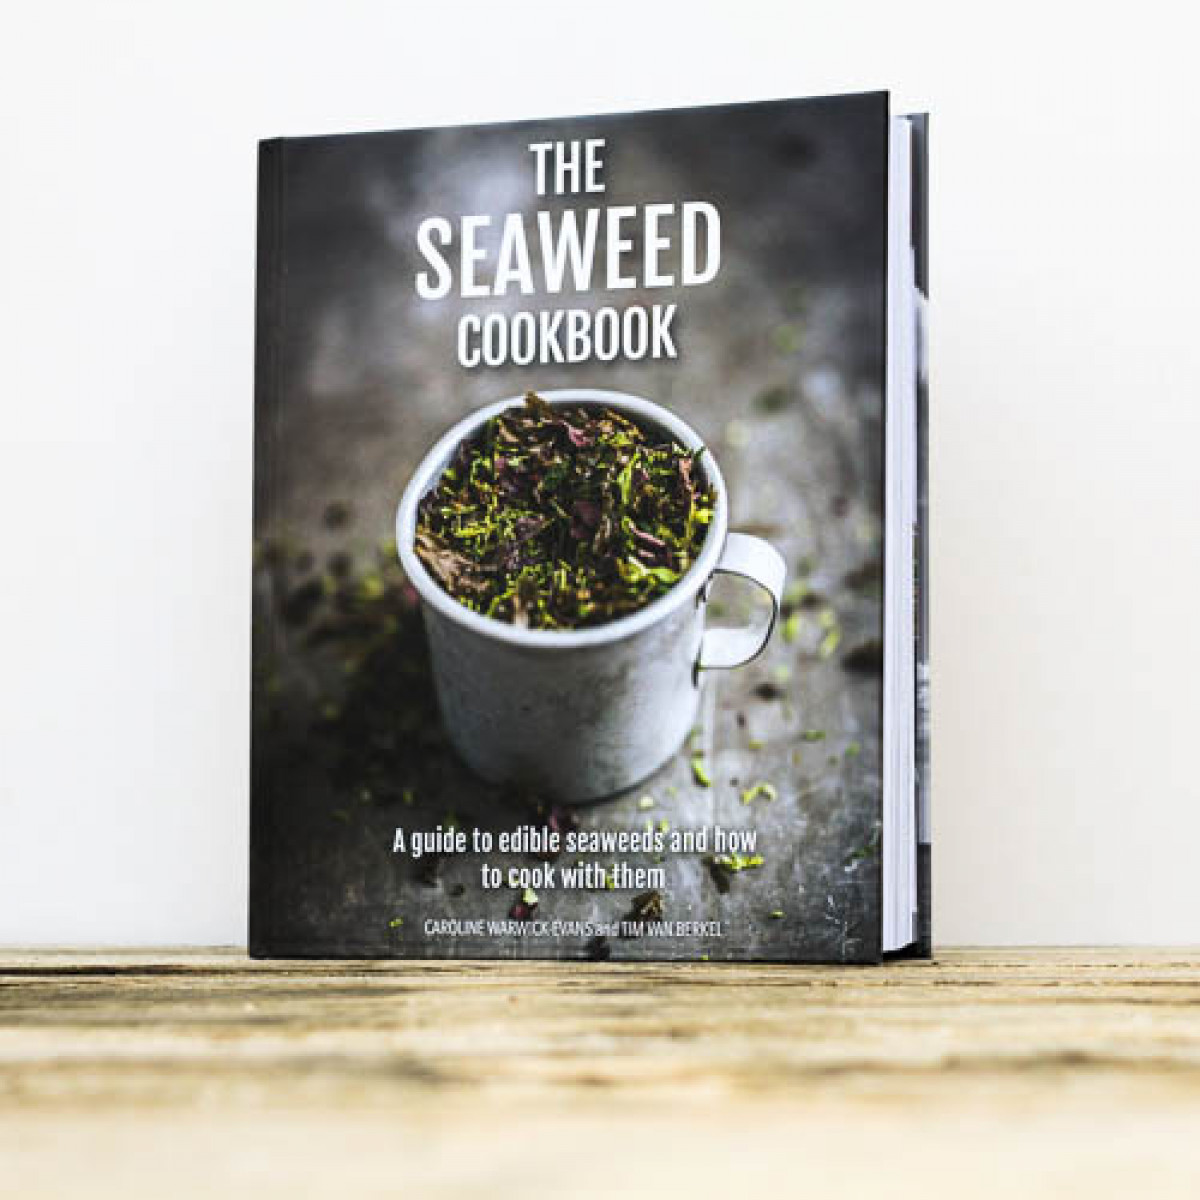 Product picture for The Seaweed Cookbook